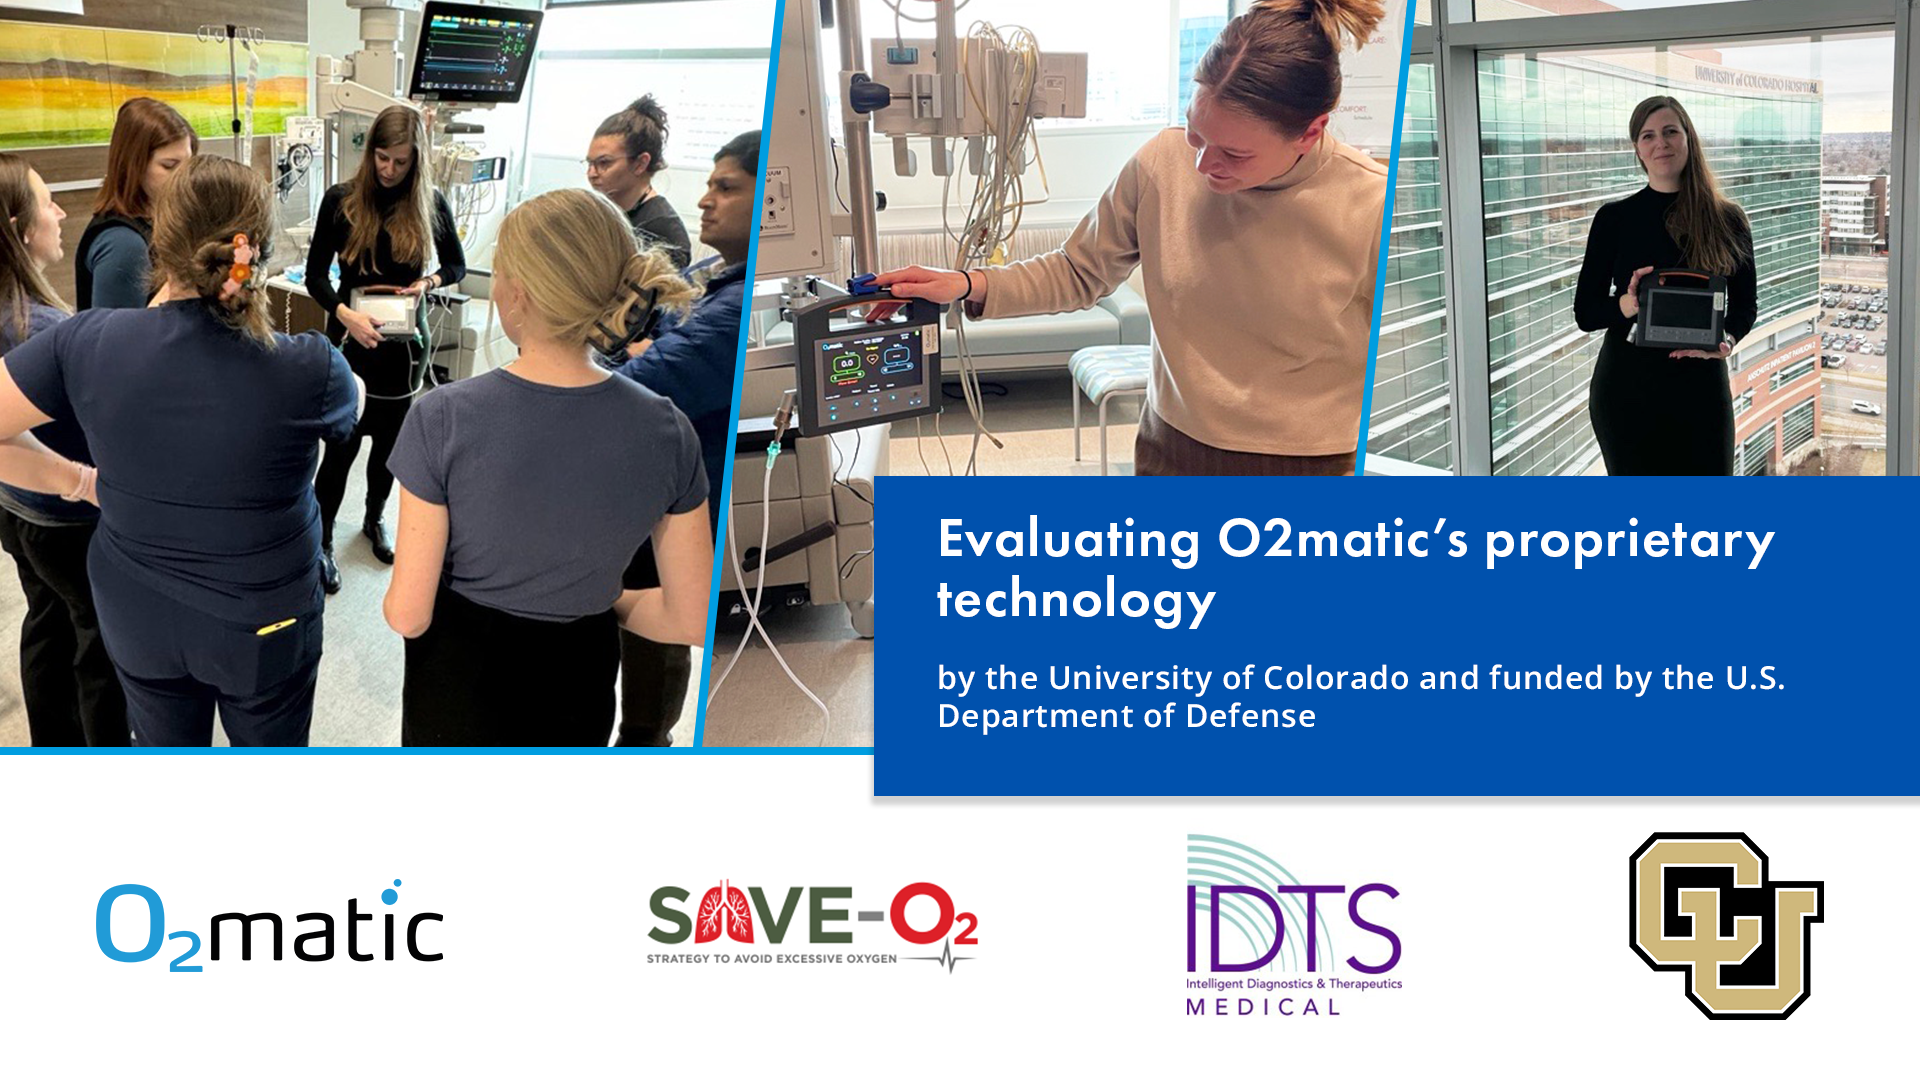 You are currently viewing O2matic’s Proprietary Technology to be Evaluated by the University of Colorado, Funded by the U.S. Department of Defense